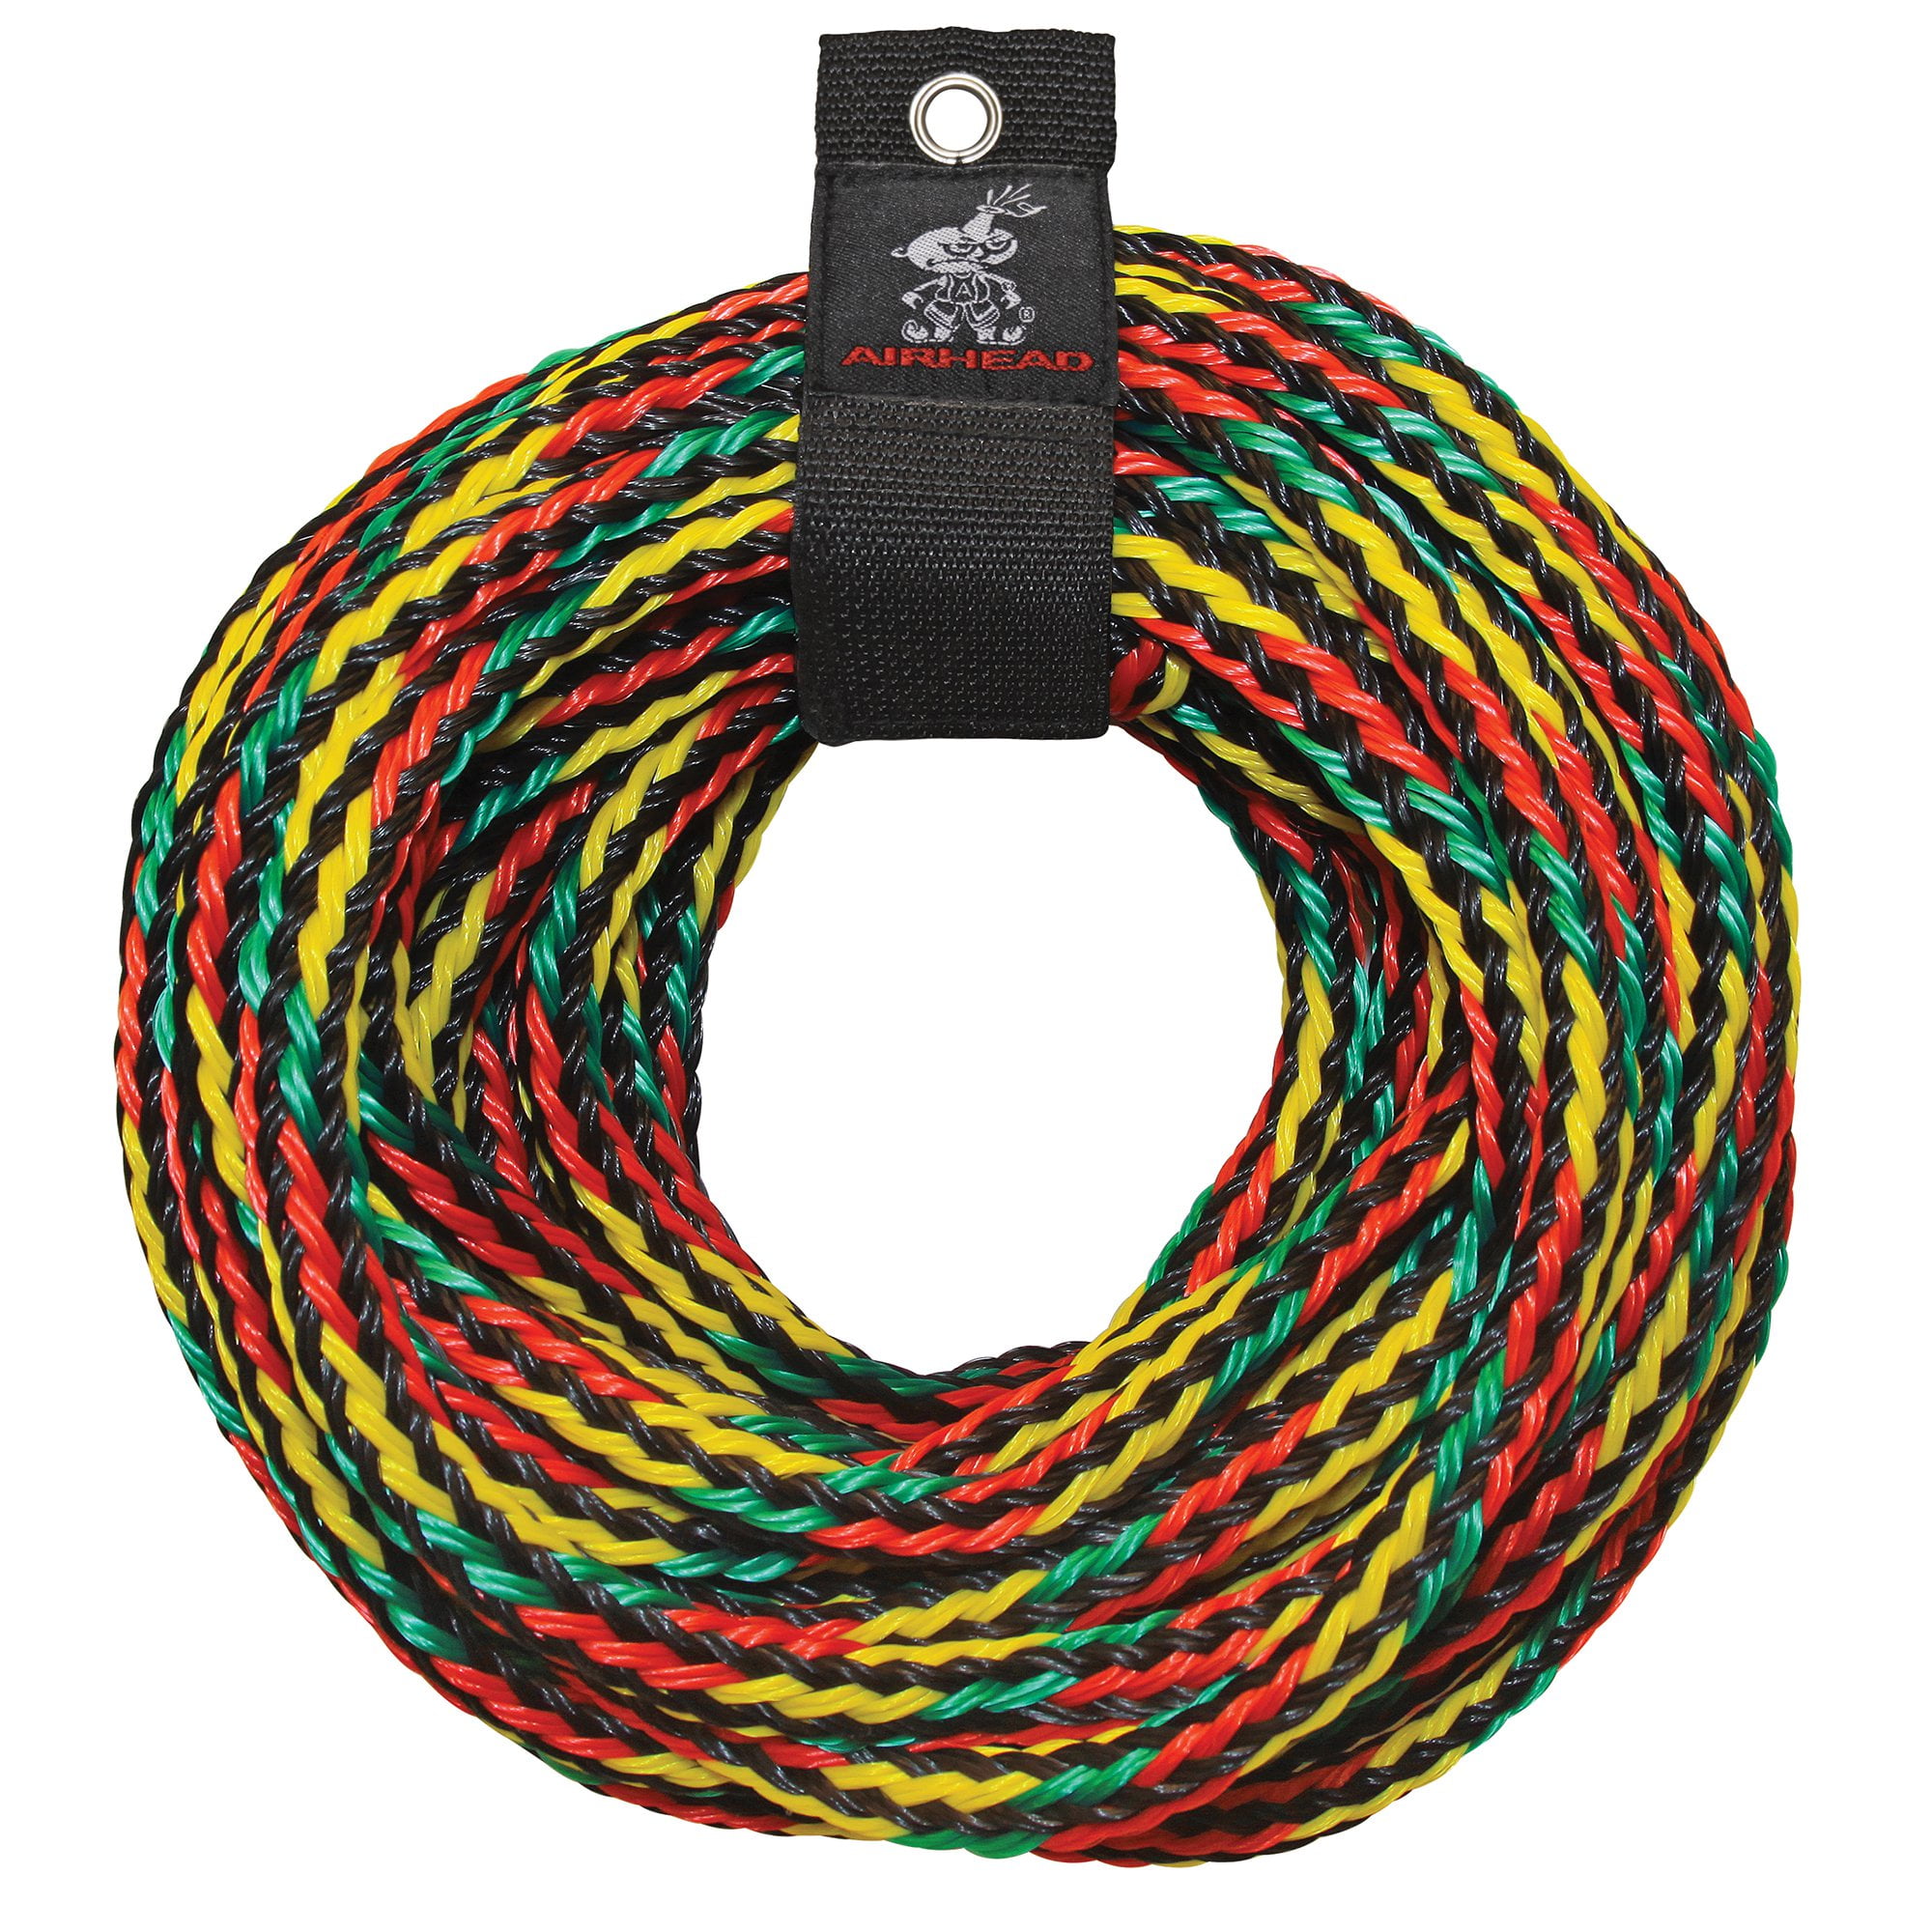 Airhead SPORTSSTUFF 53-1982 Chariot Duo Double Rider Towable 60' Tube Tow Rope 